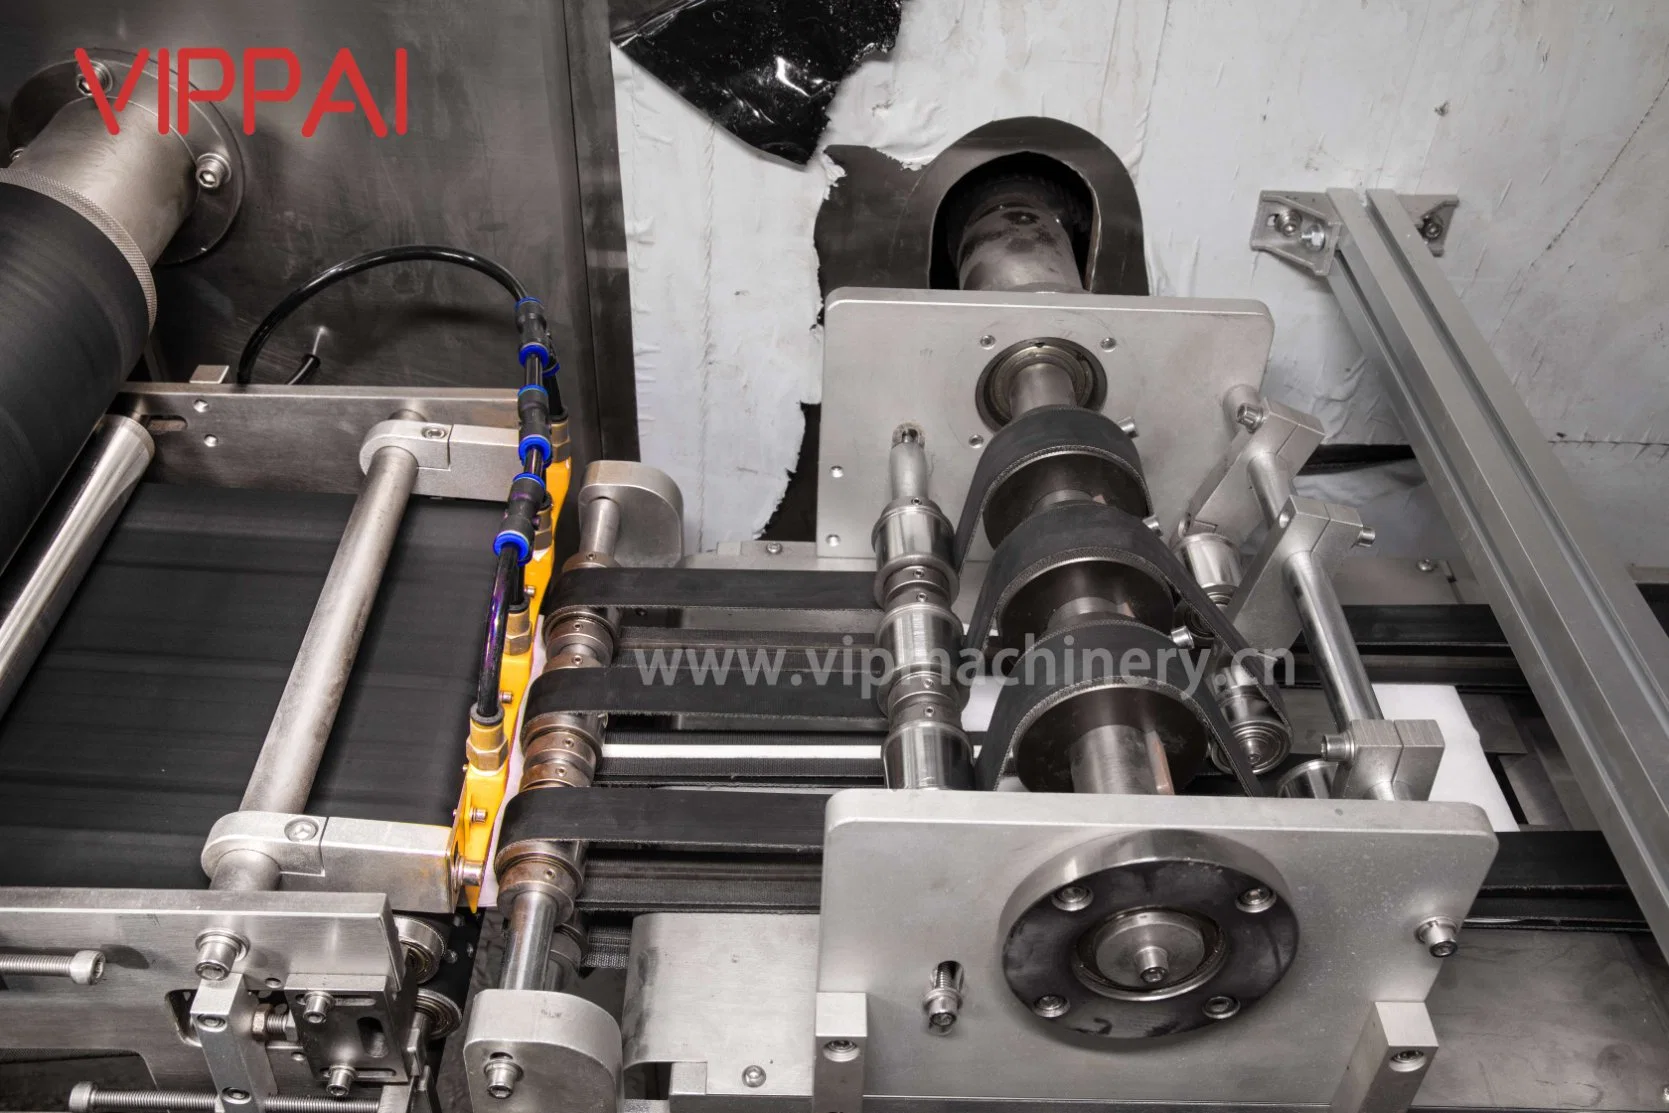 Vippai Hot Selling Beauty Cosmetic Face Facial Mask Making Packaging Machine Production Line in Russia